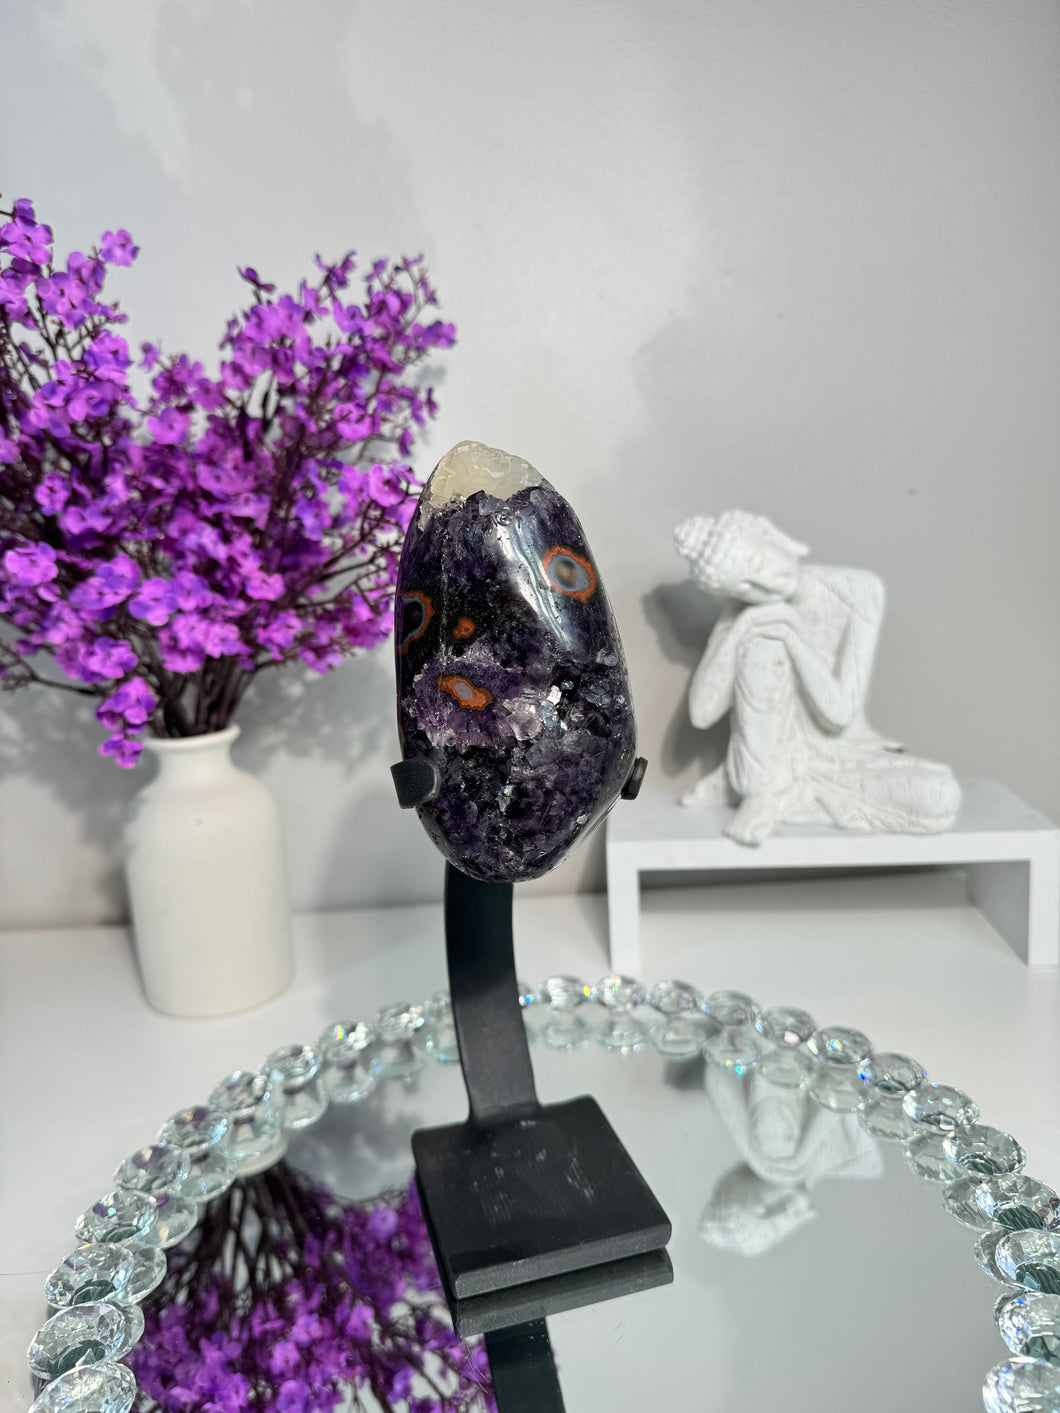 Rare Amethyst geode with calcite and agate 2862